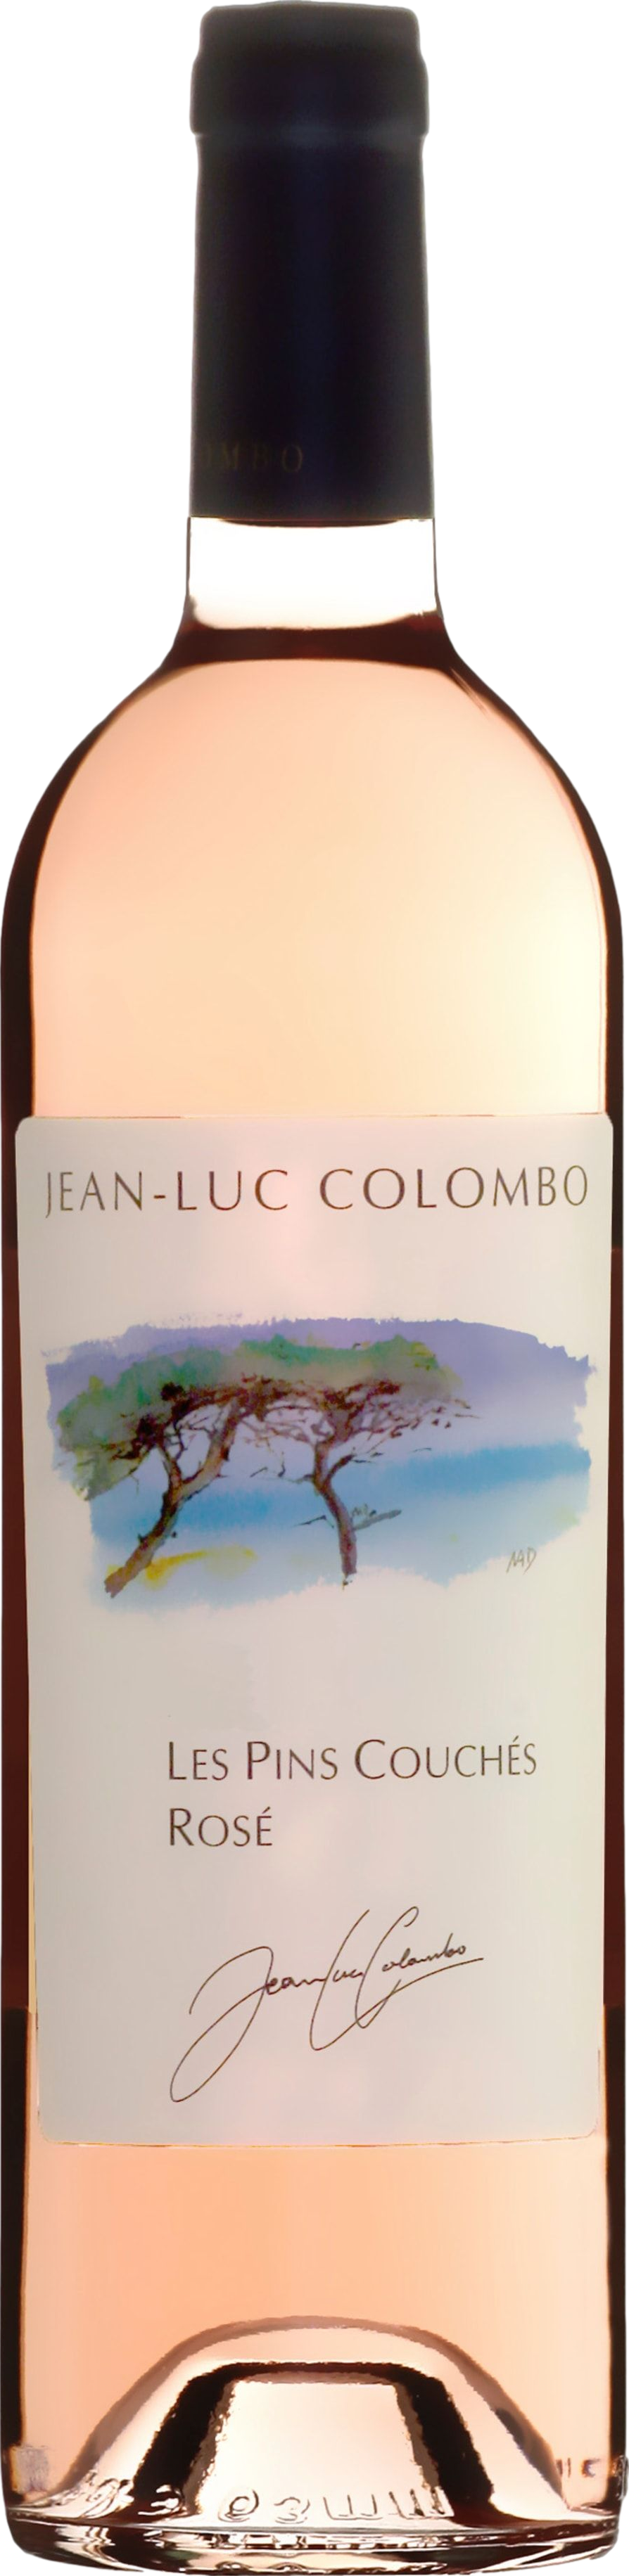 Vins Jean-Luc Colombo Jean-Luc Colombo Les Pins Couches Rose 2019